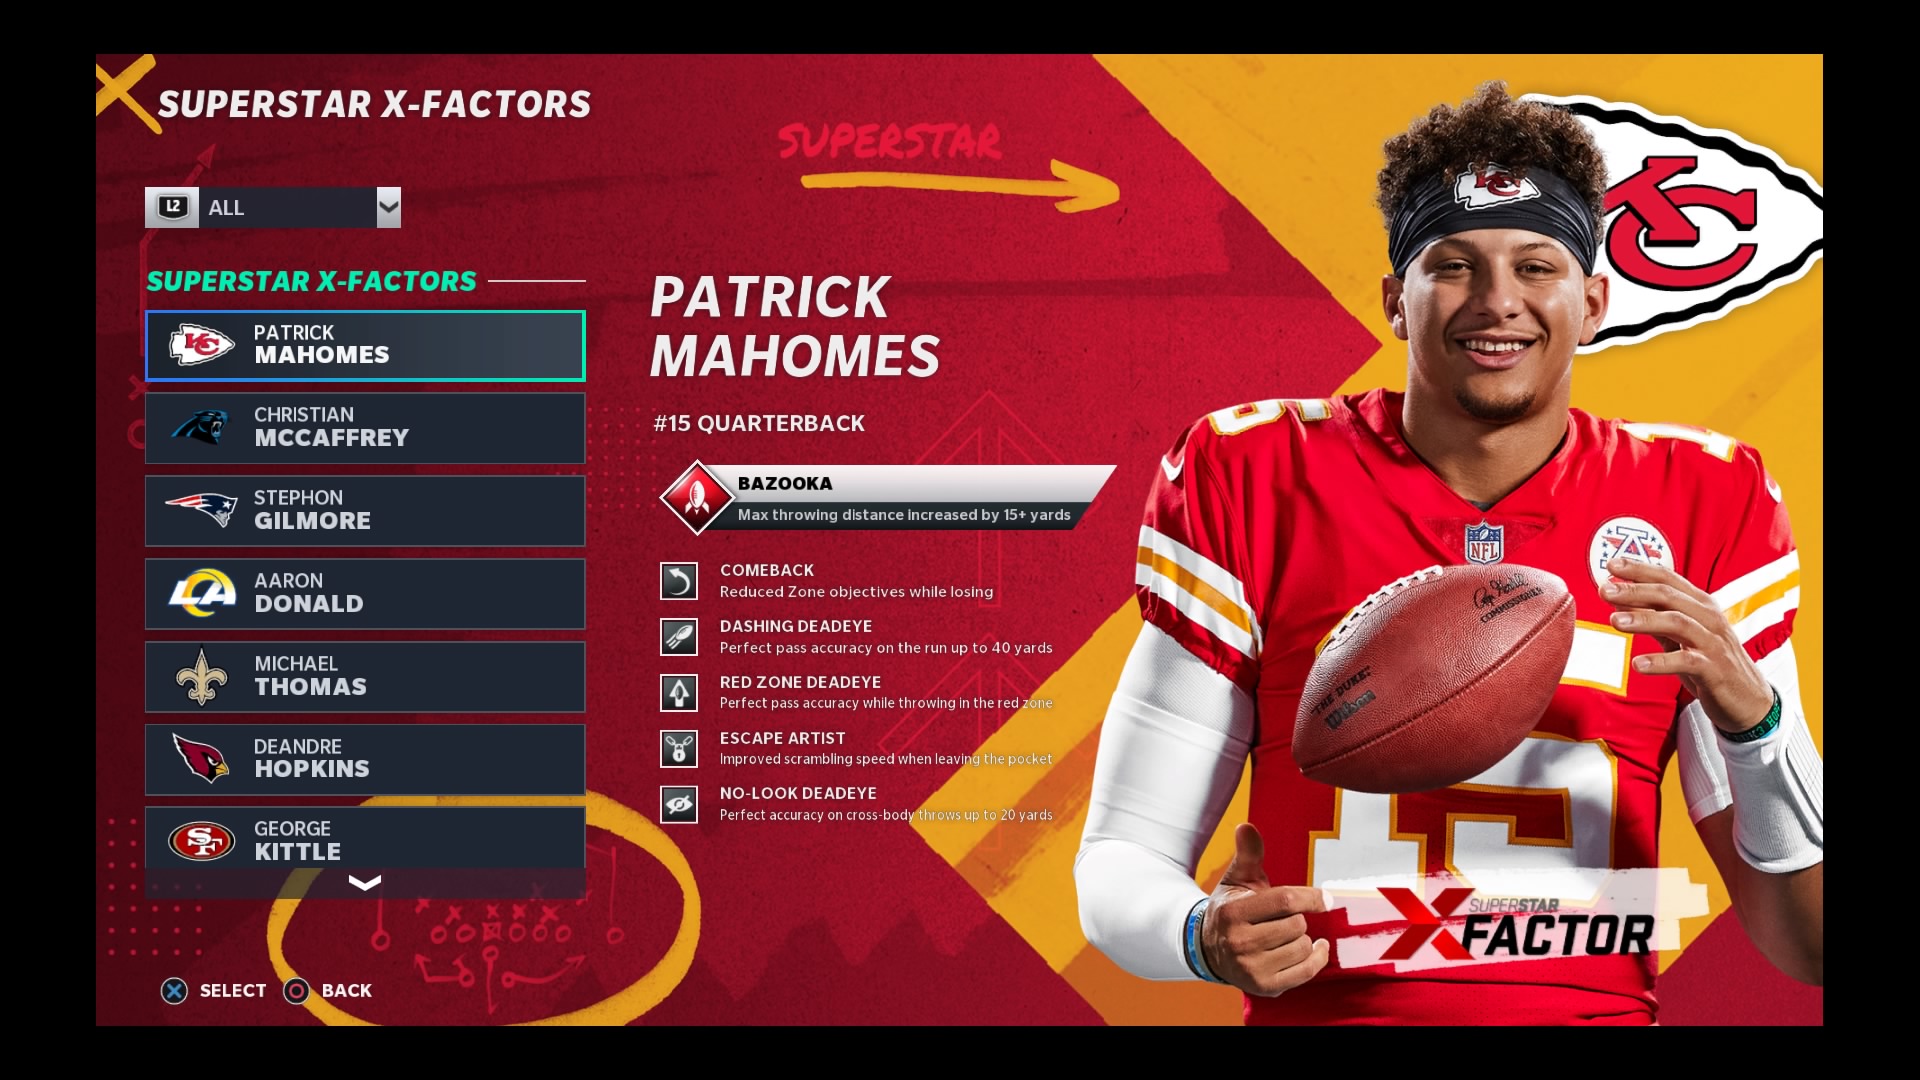 Madden player ratings